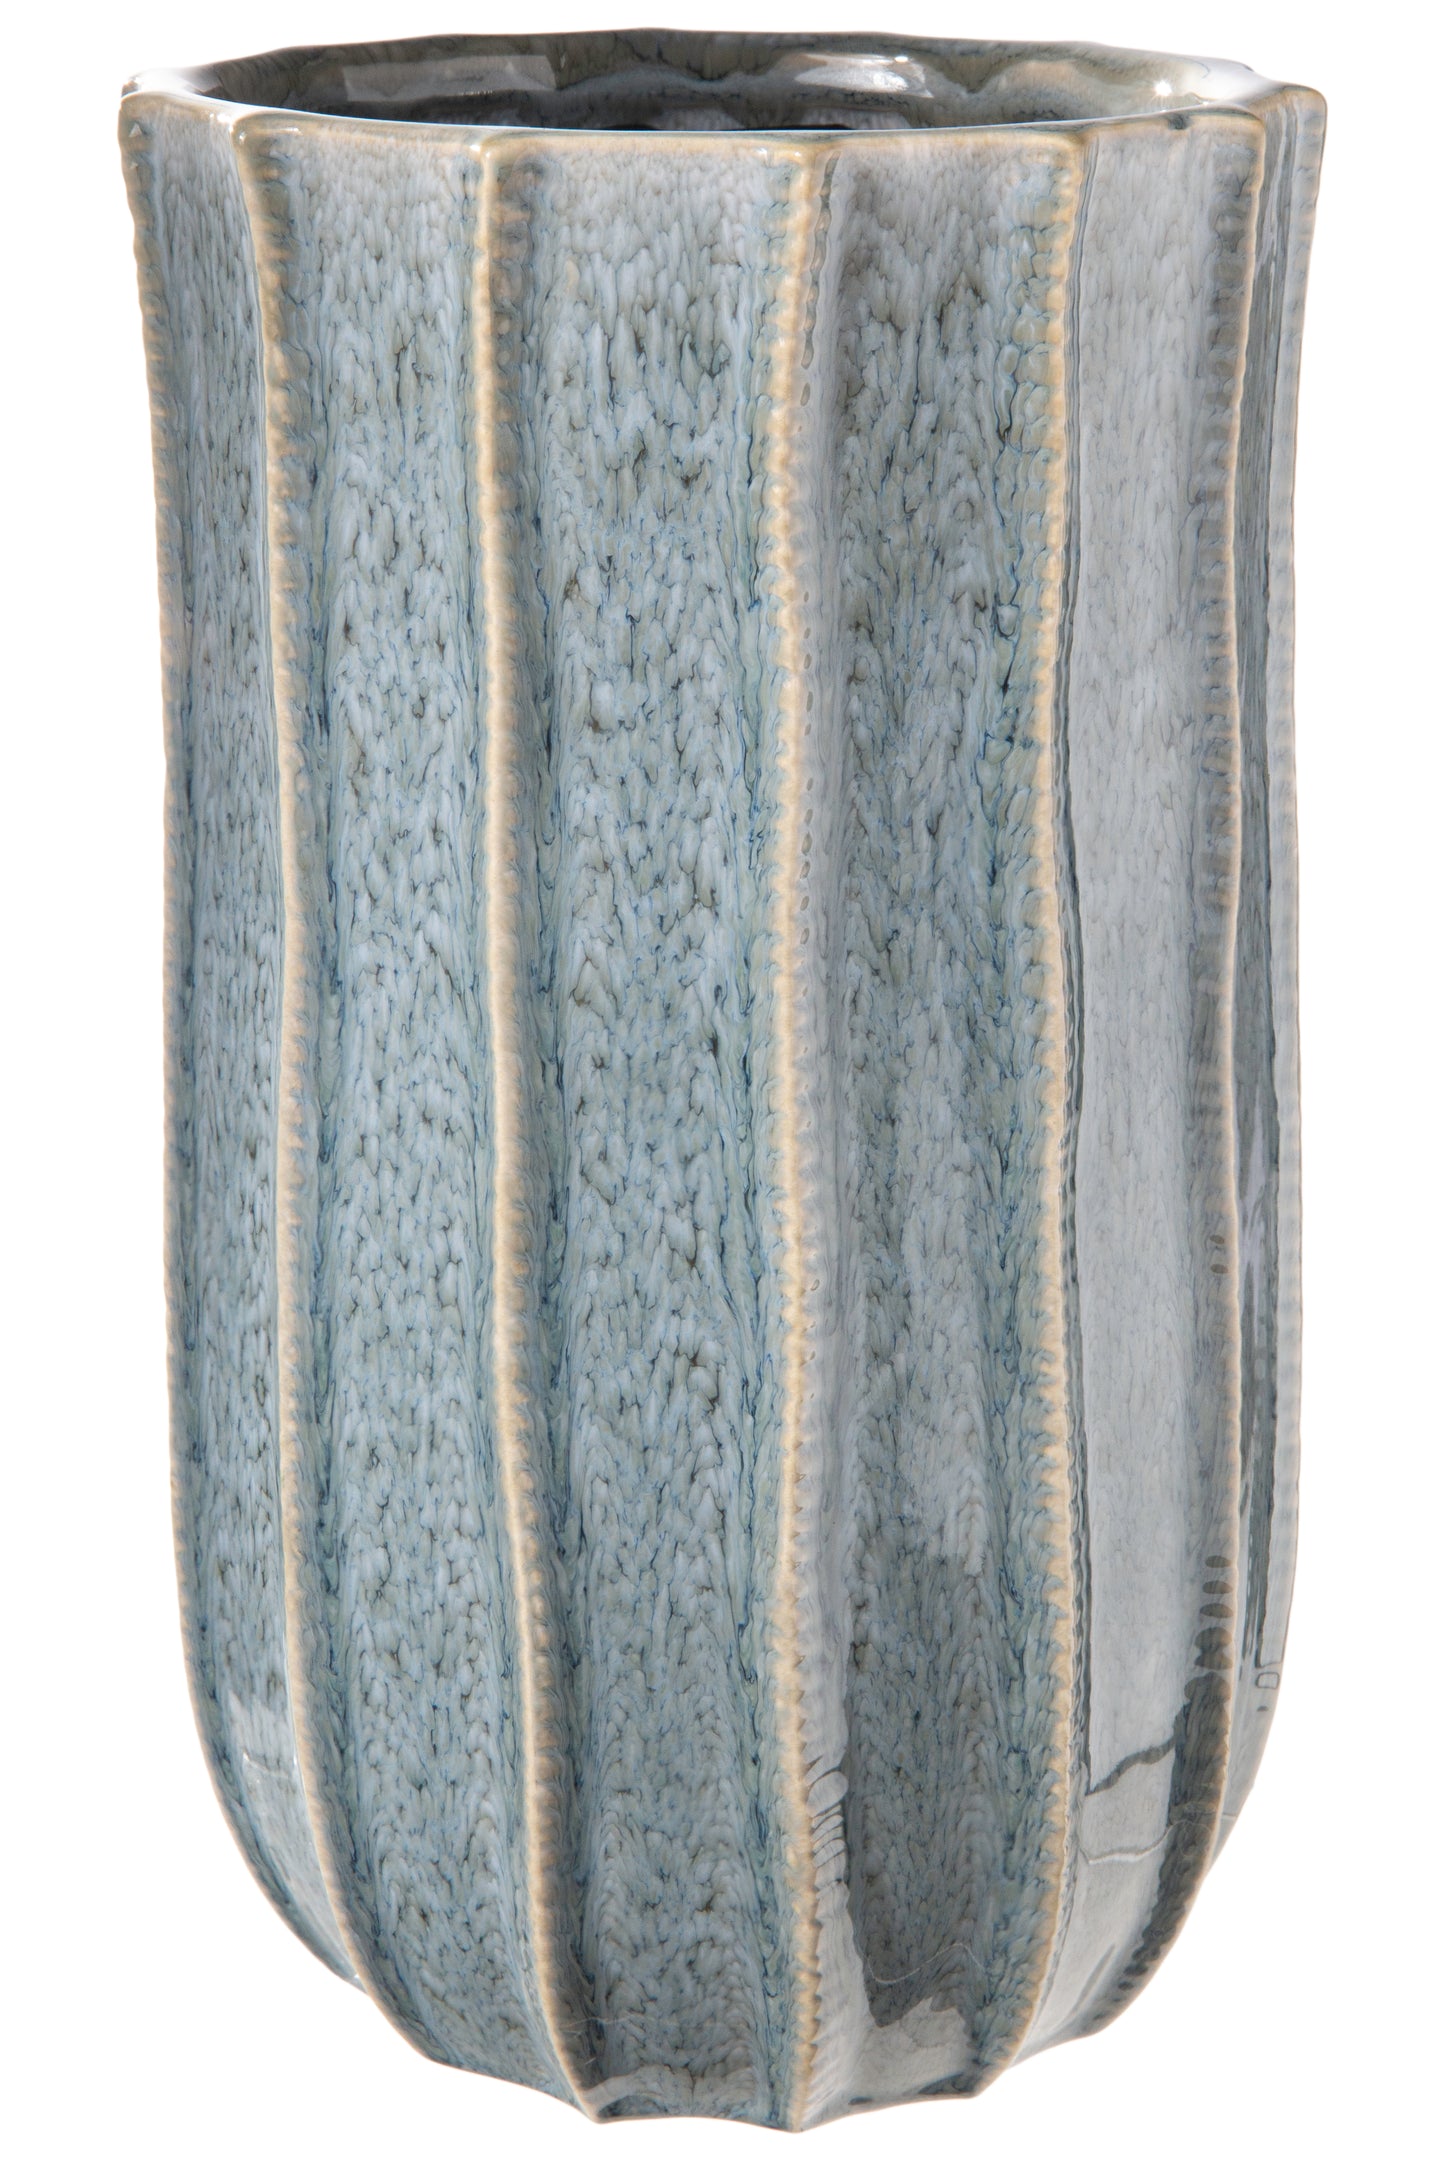 Ceramic Round Vase with Embossed Tan Edges Vertical Line and Asymetrical Pattern Design Steel Blue